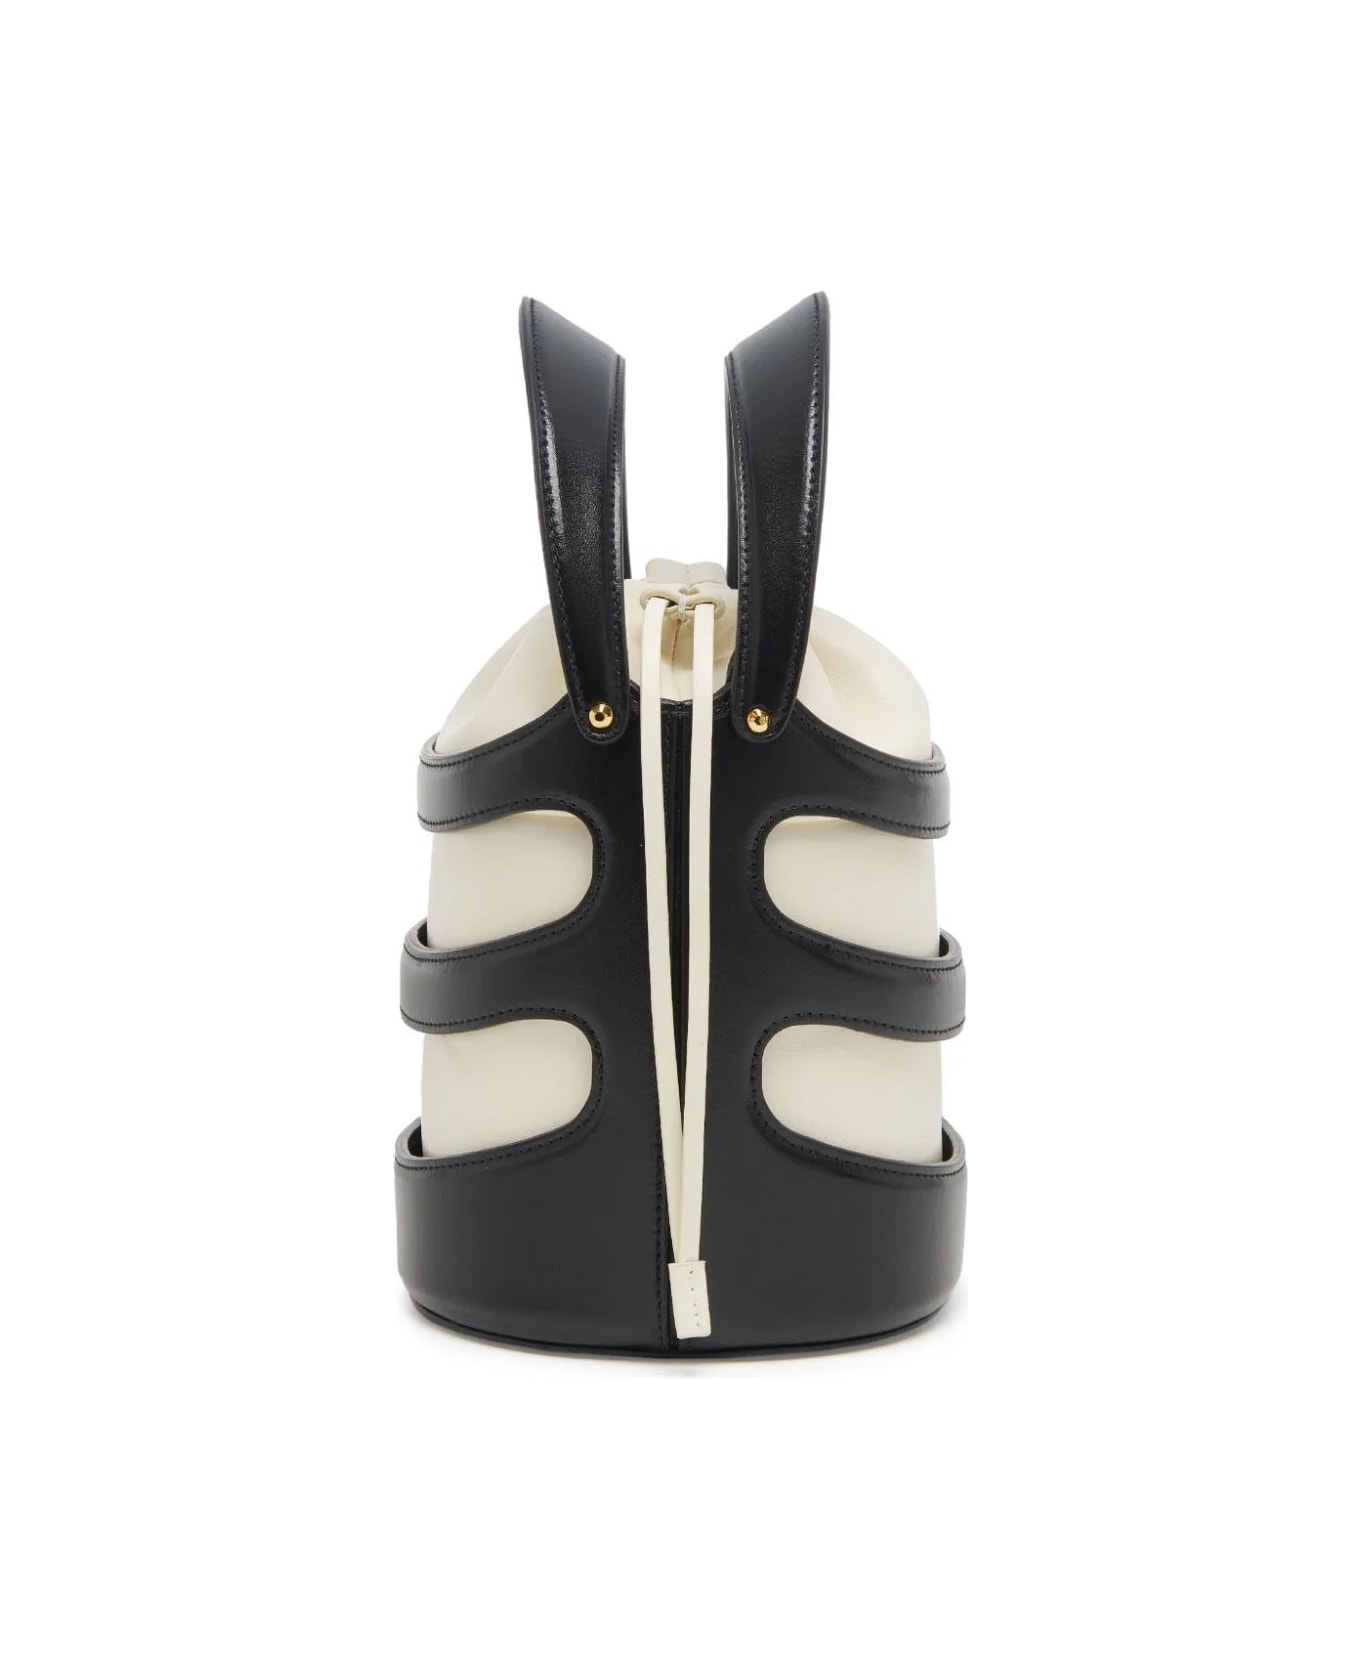 Alexander McQueen The Rise Bucket Bag In Black And Soft Ivory - White